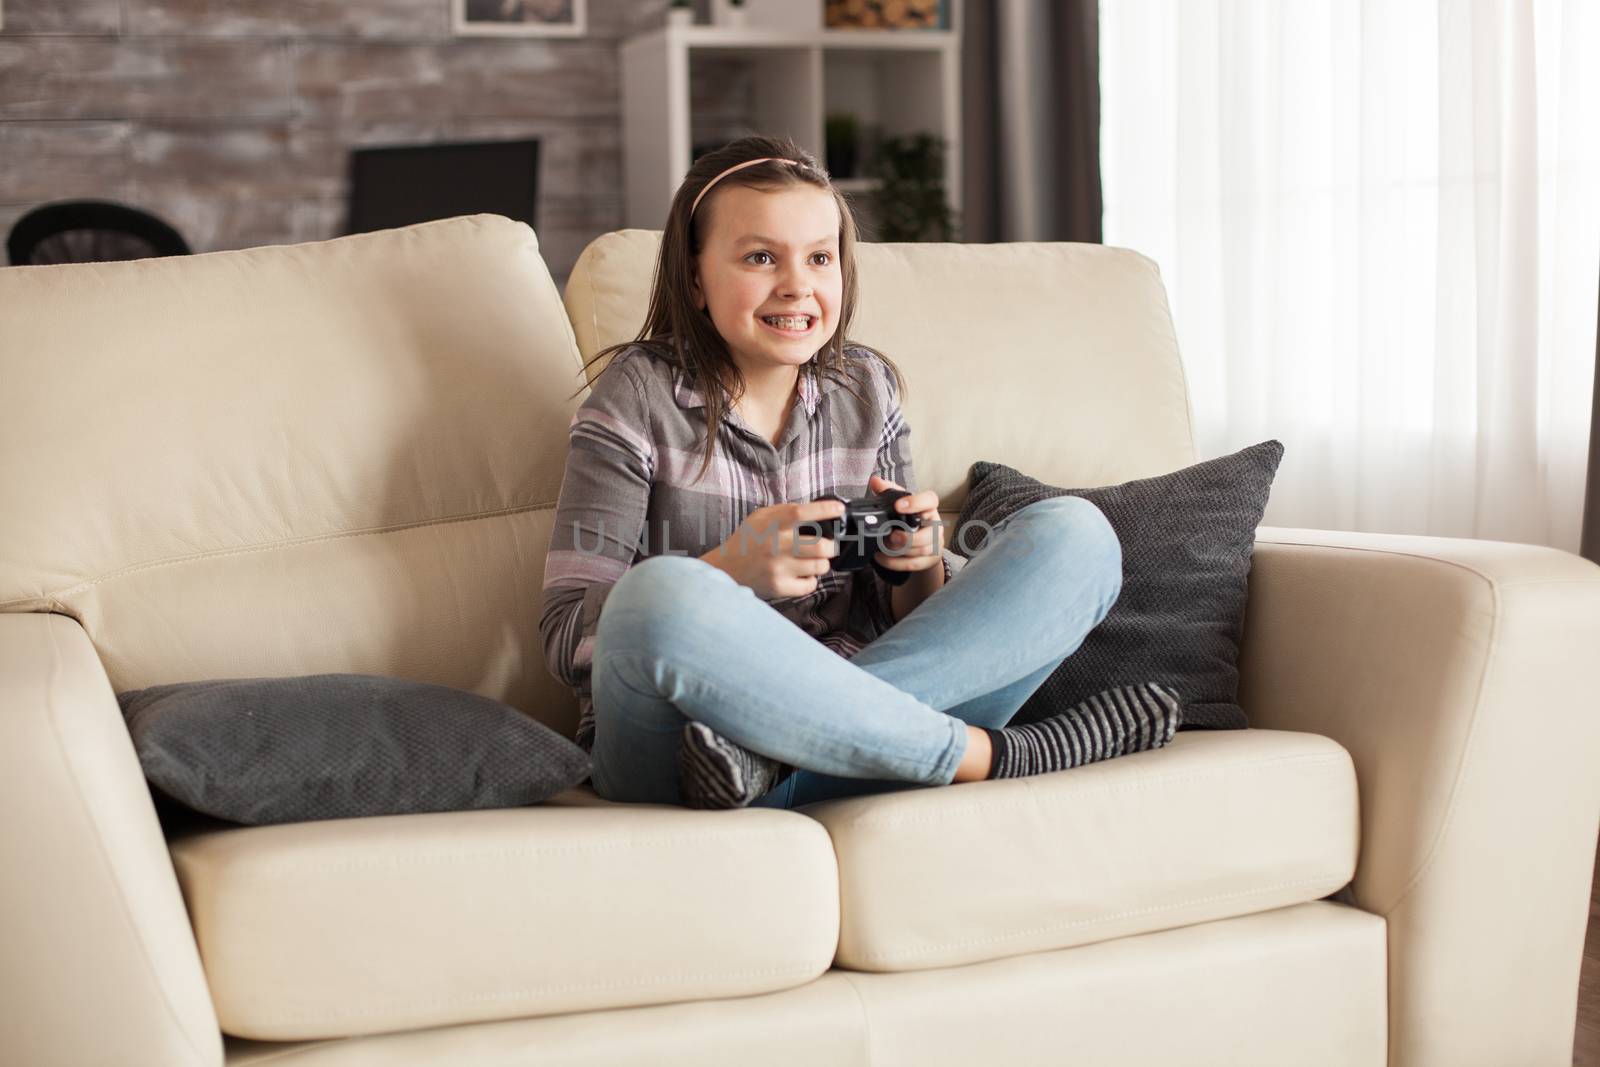 Focused little girl with braces playing video games using wireless joystick.